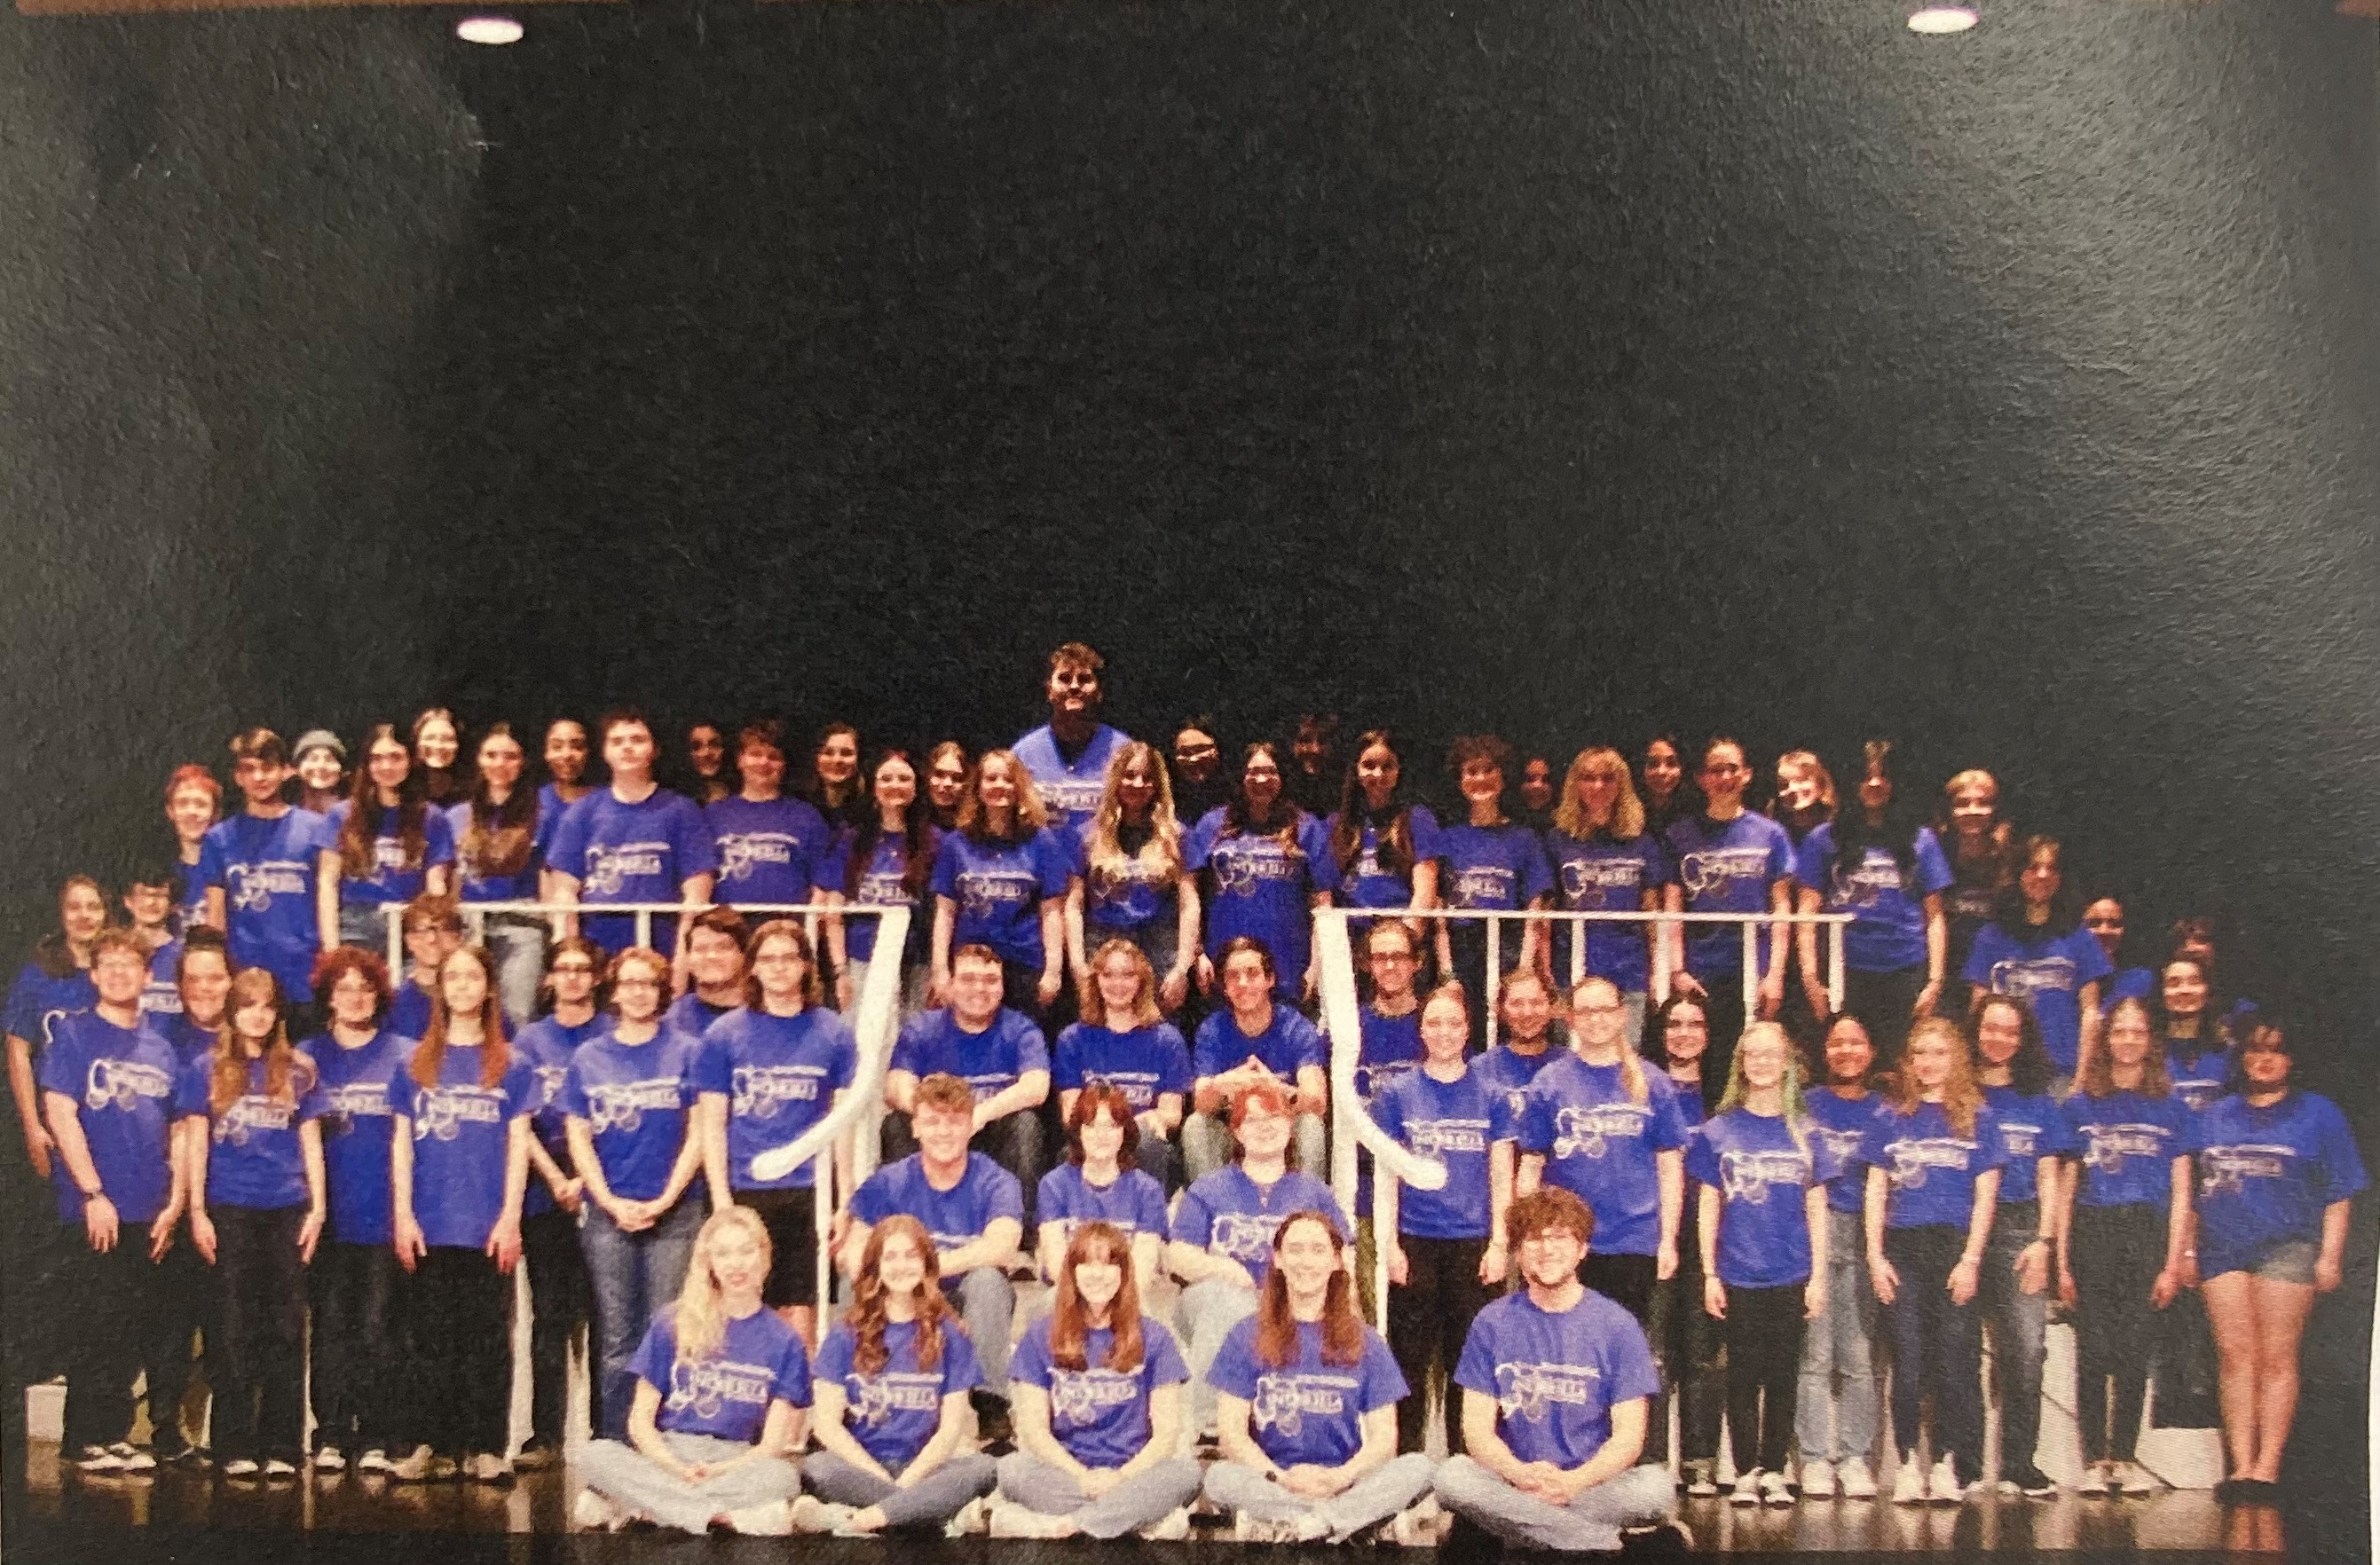 The Student Cast, Crew and Orchestra Members of Cinderella